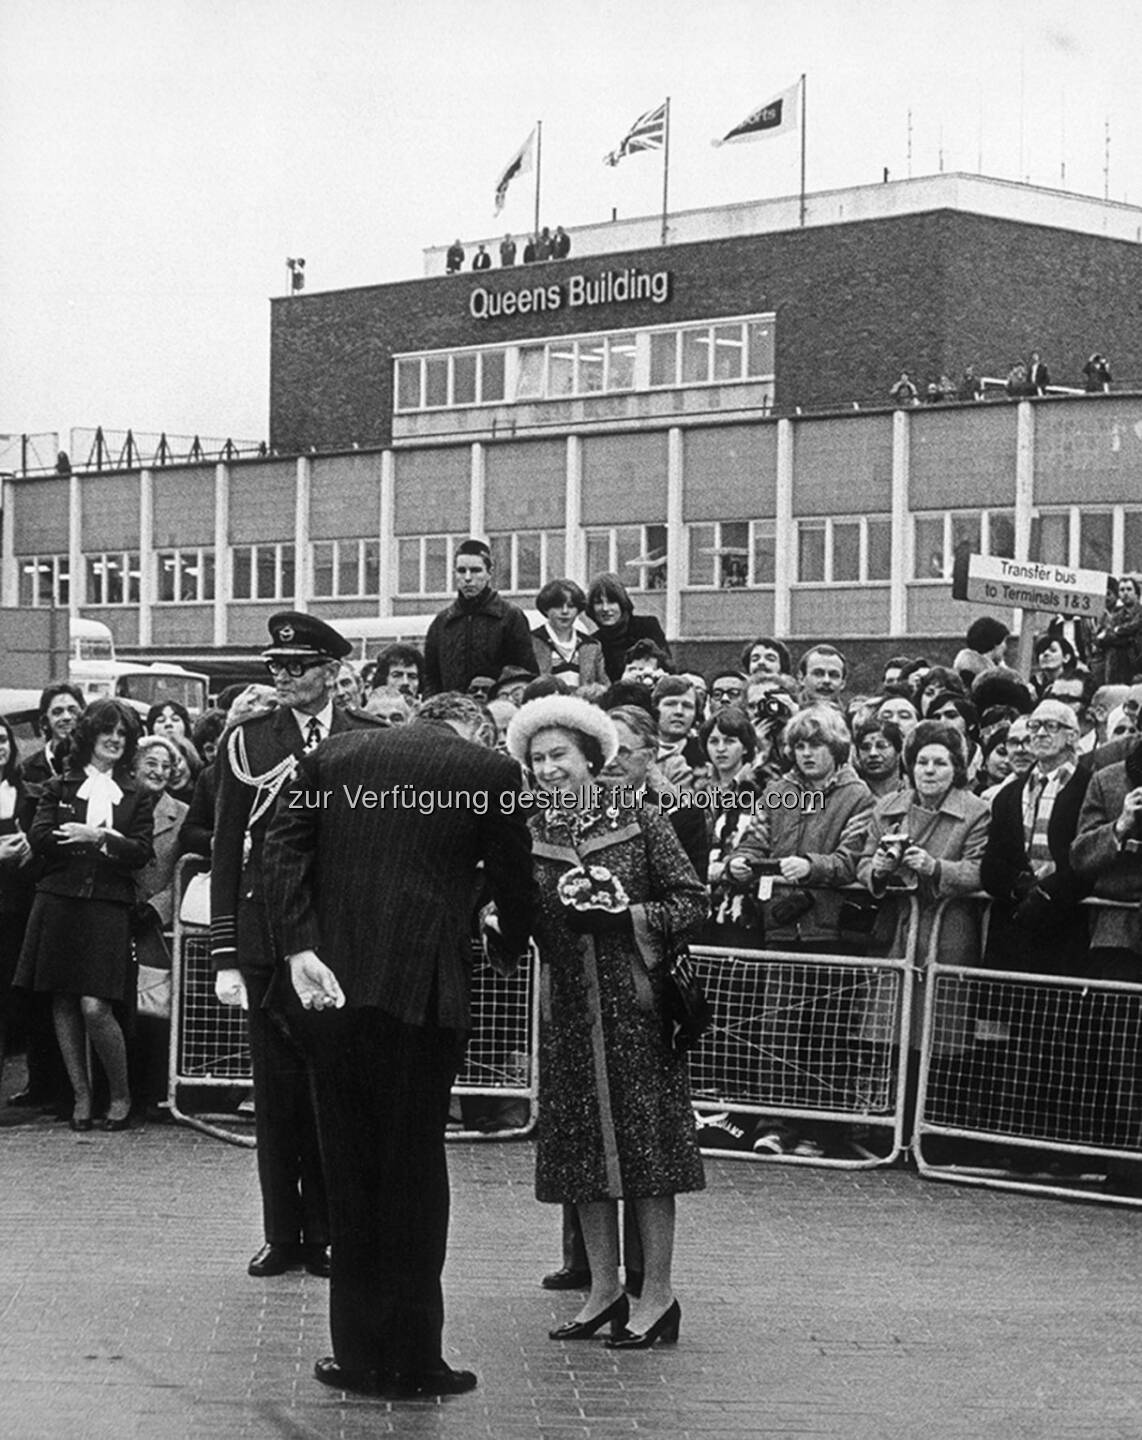 Heathrow Airport, Her Majesty The Queen visitis the airport, 1970s. Image ref XHHE00073, orphan works  (c) Aussendung Austrian